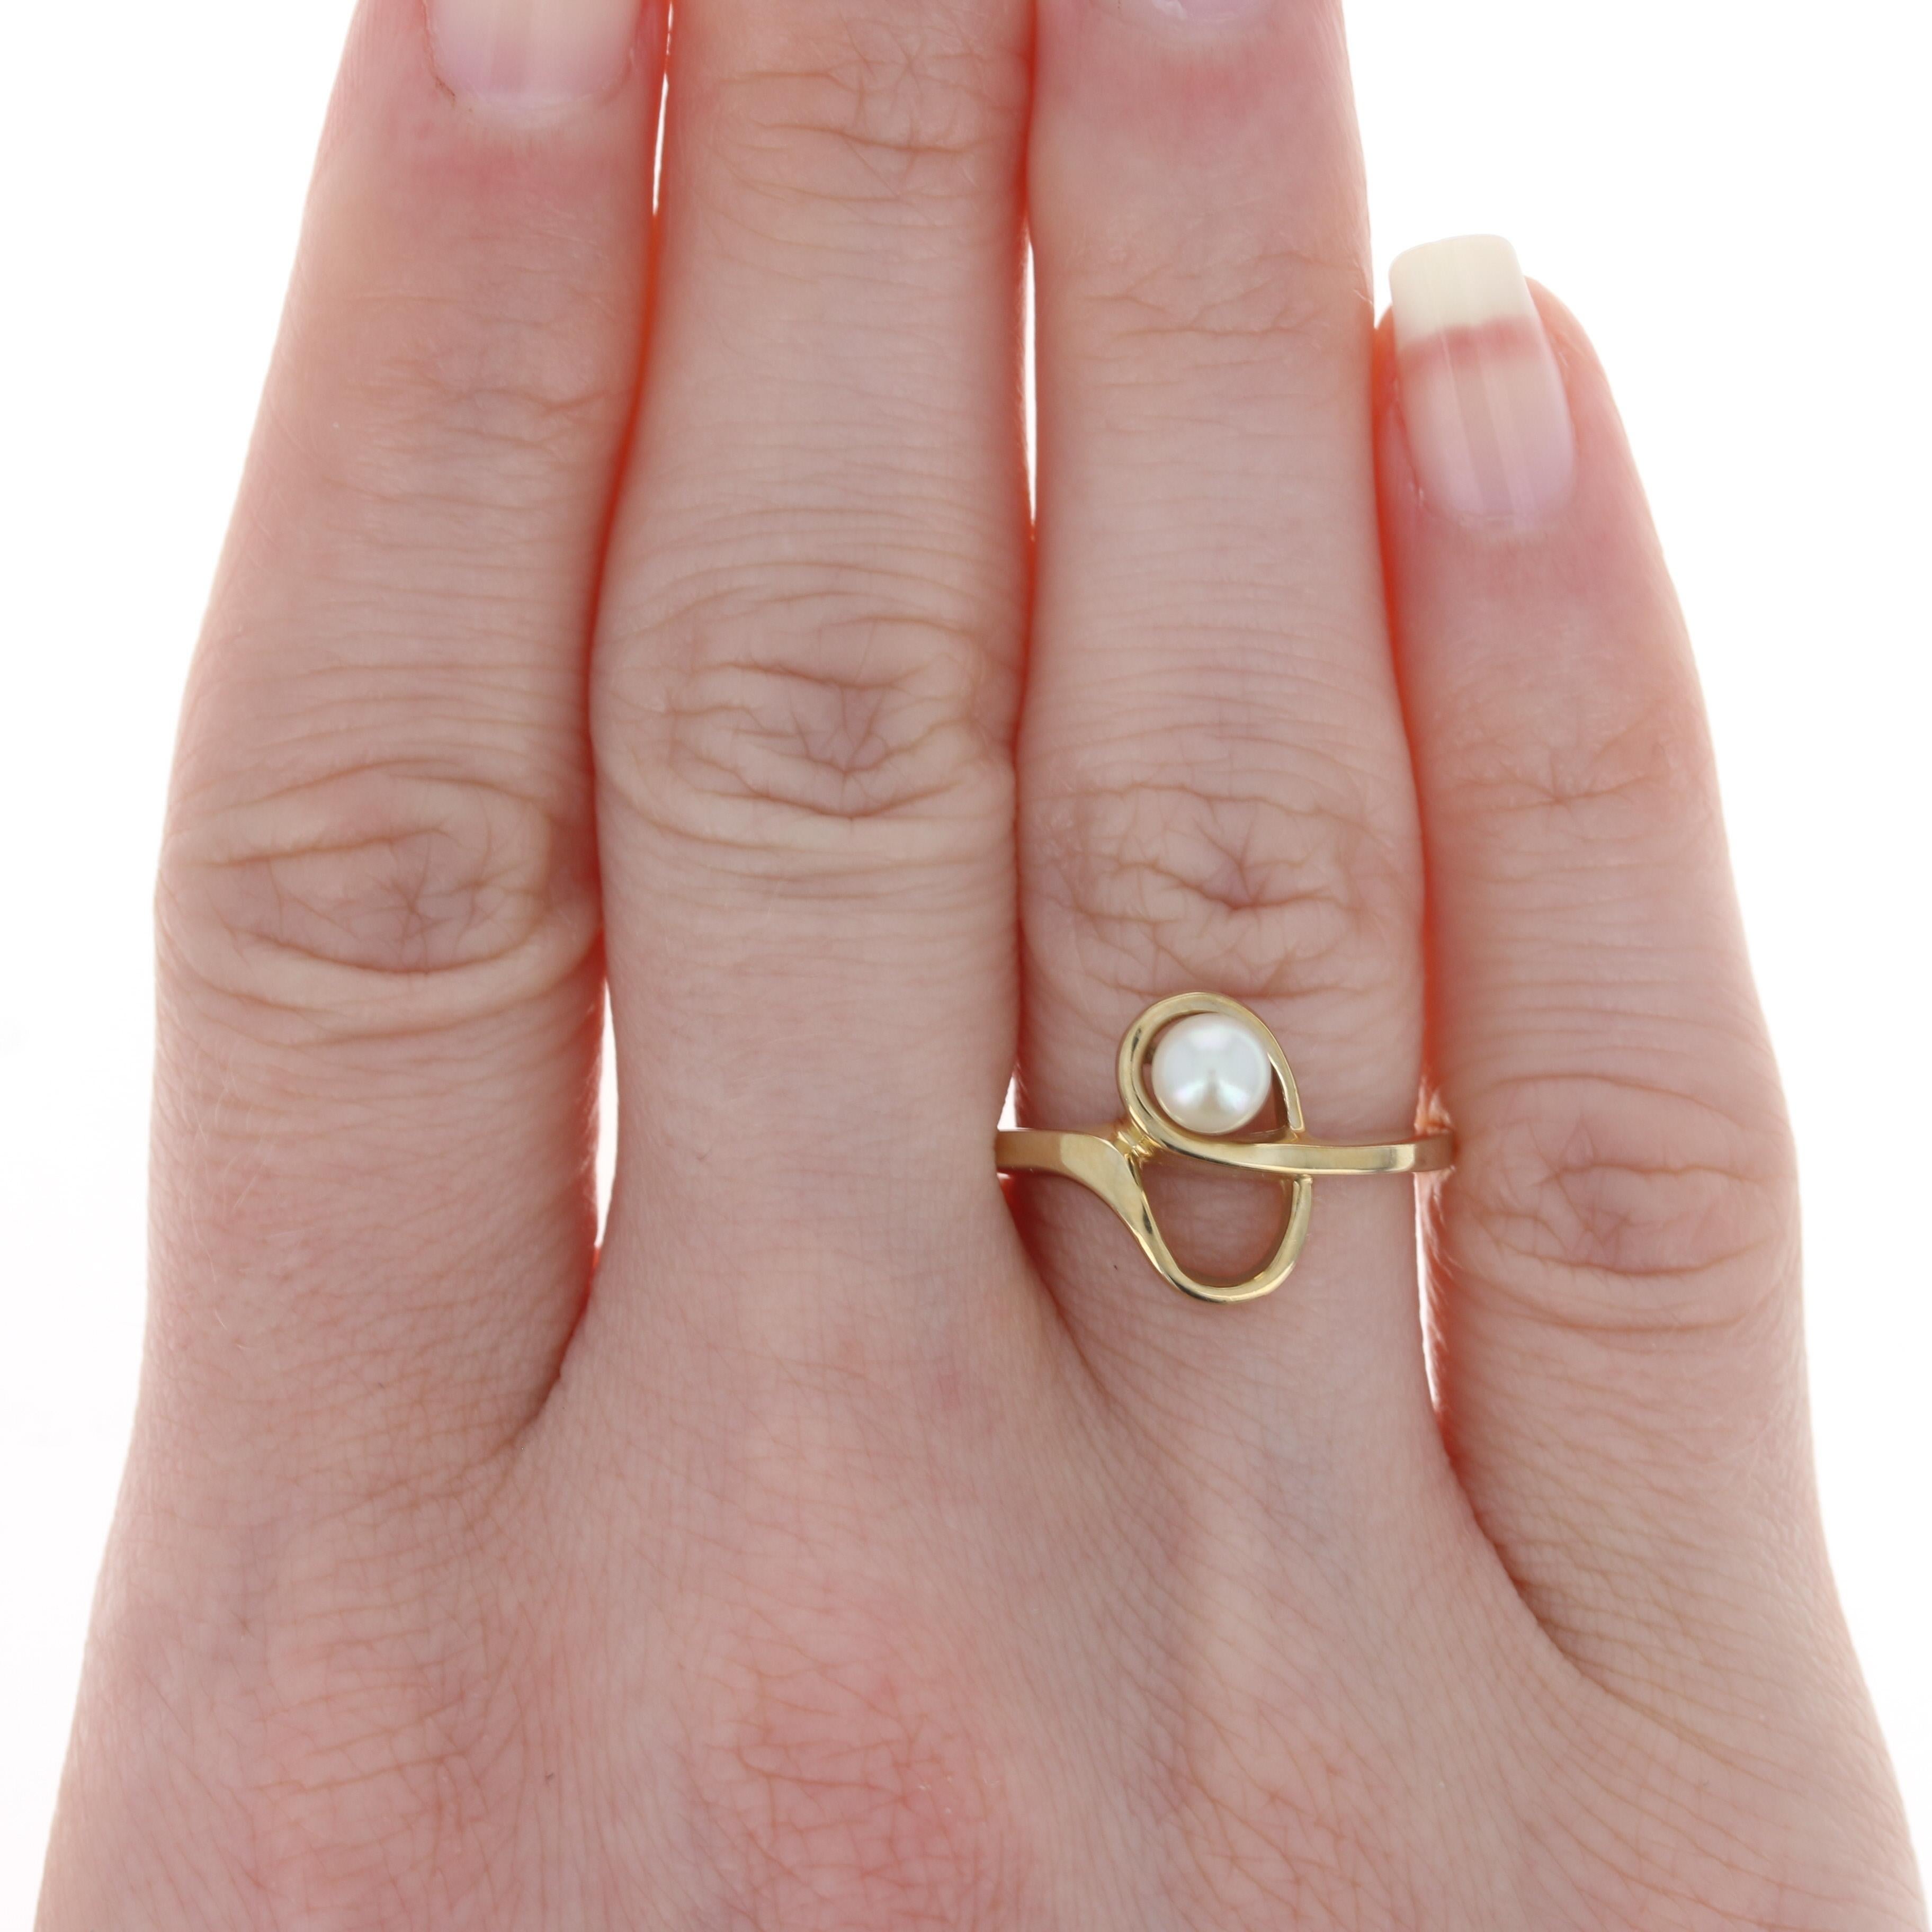 New Cultured Pearl Ring, 14k Yellow Gold Solitaire Bypass 2